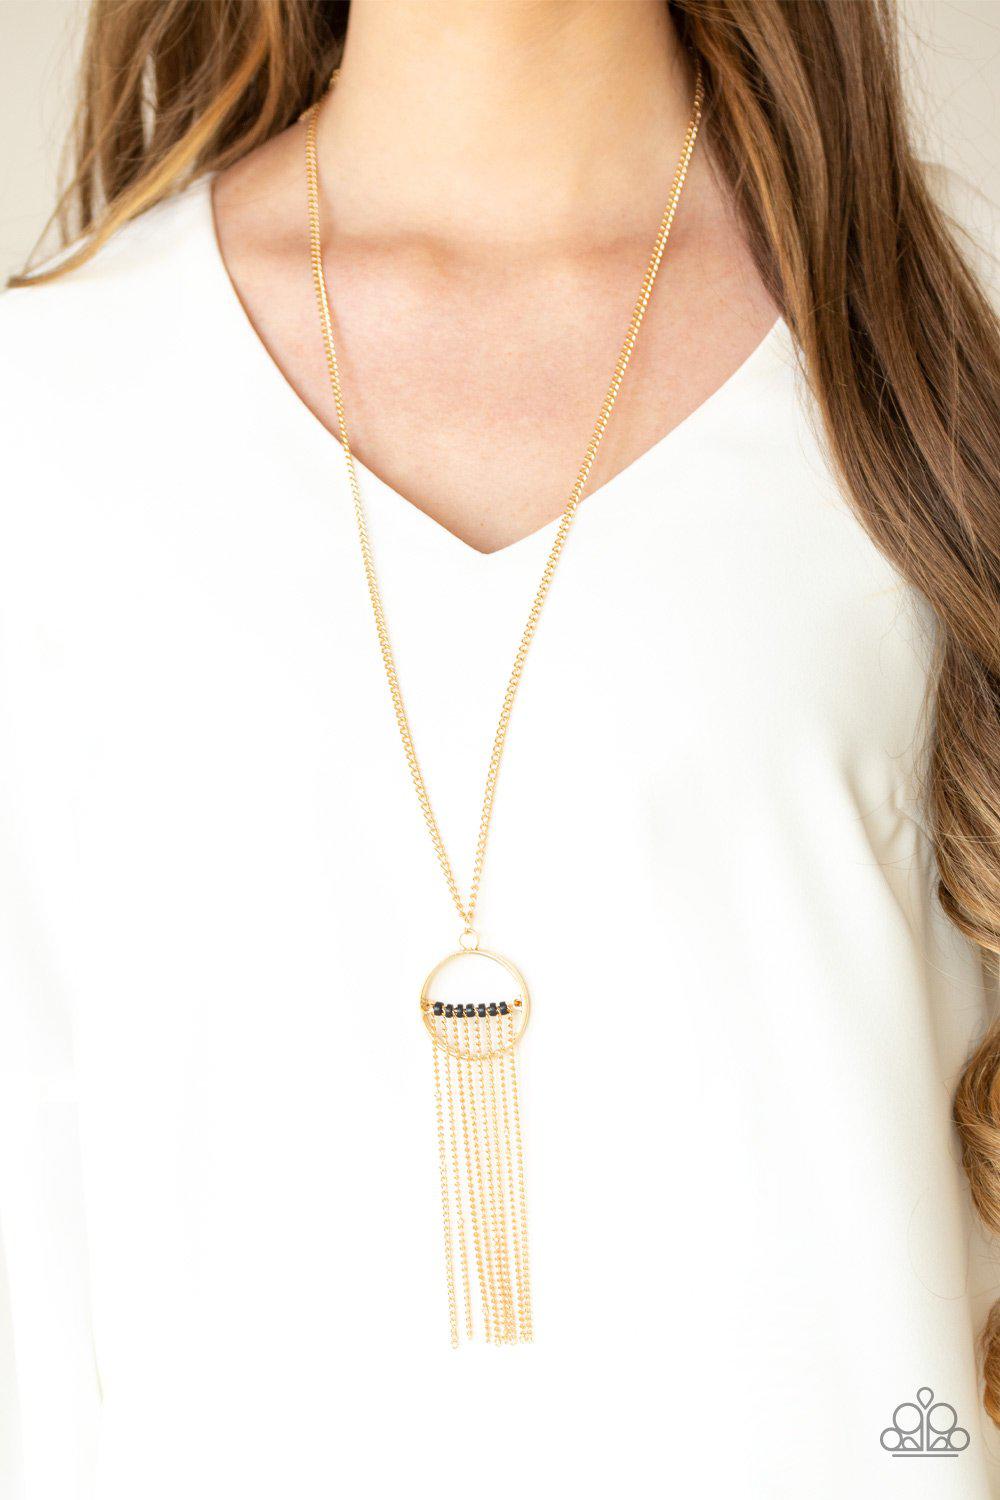 Terra Tassel Gold Necklace - Paparazzi Accessories - model -CarasShop.com - $5 Jewelry by Cara Jewels